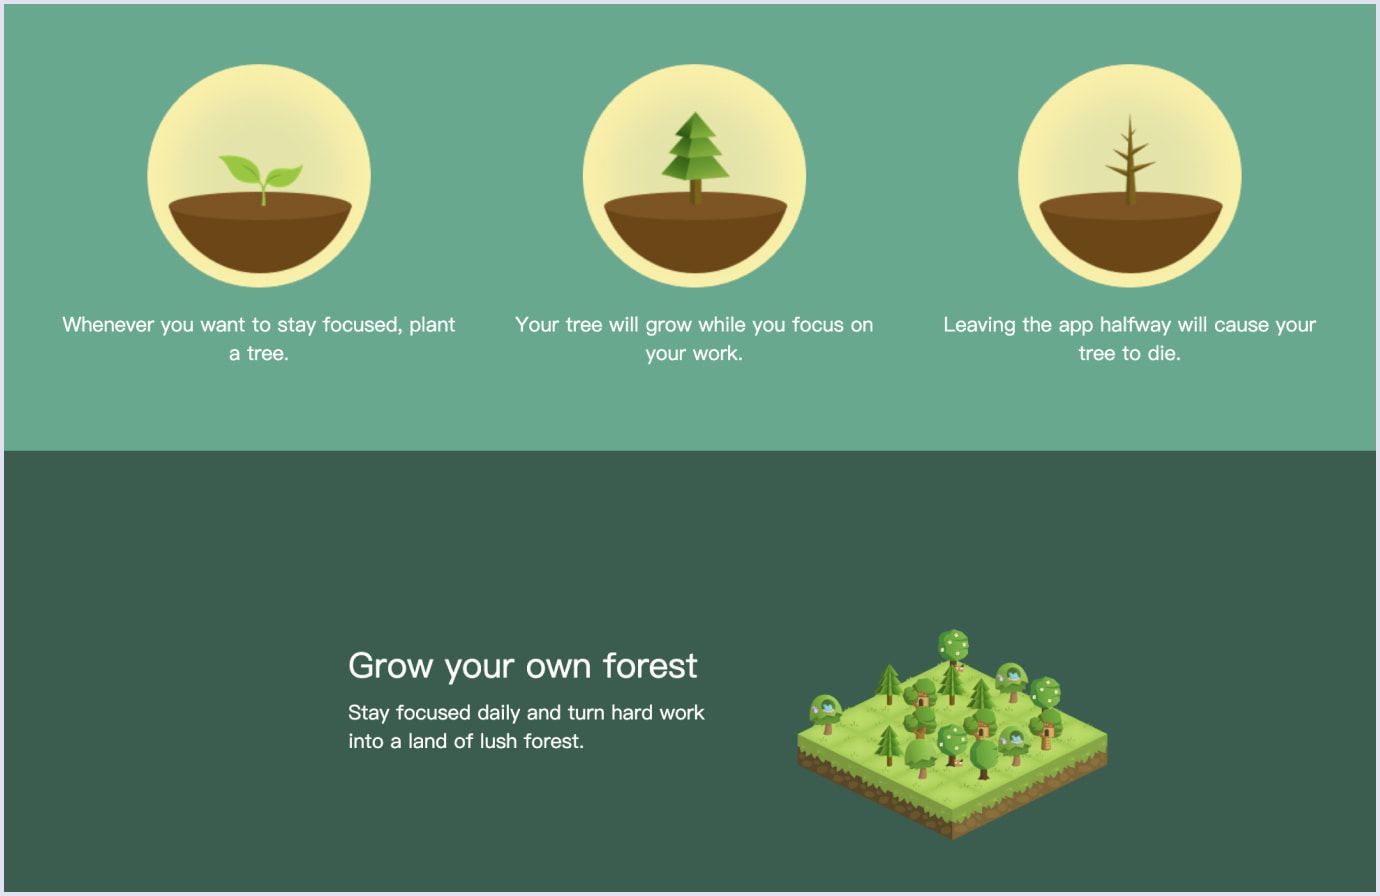 How the Forest app works